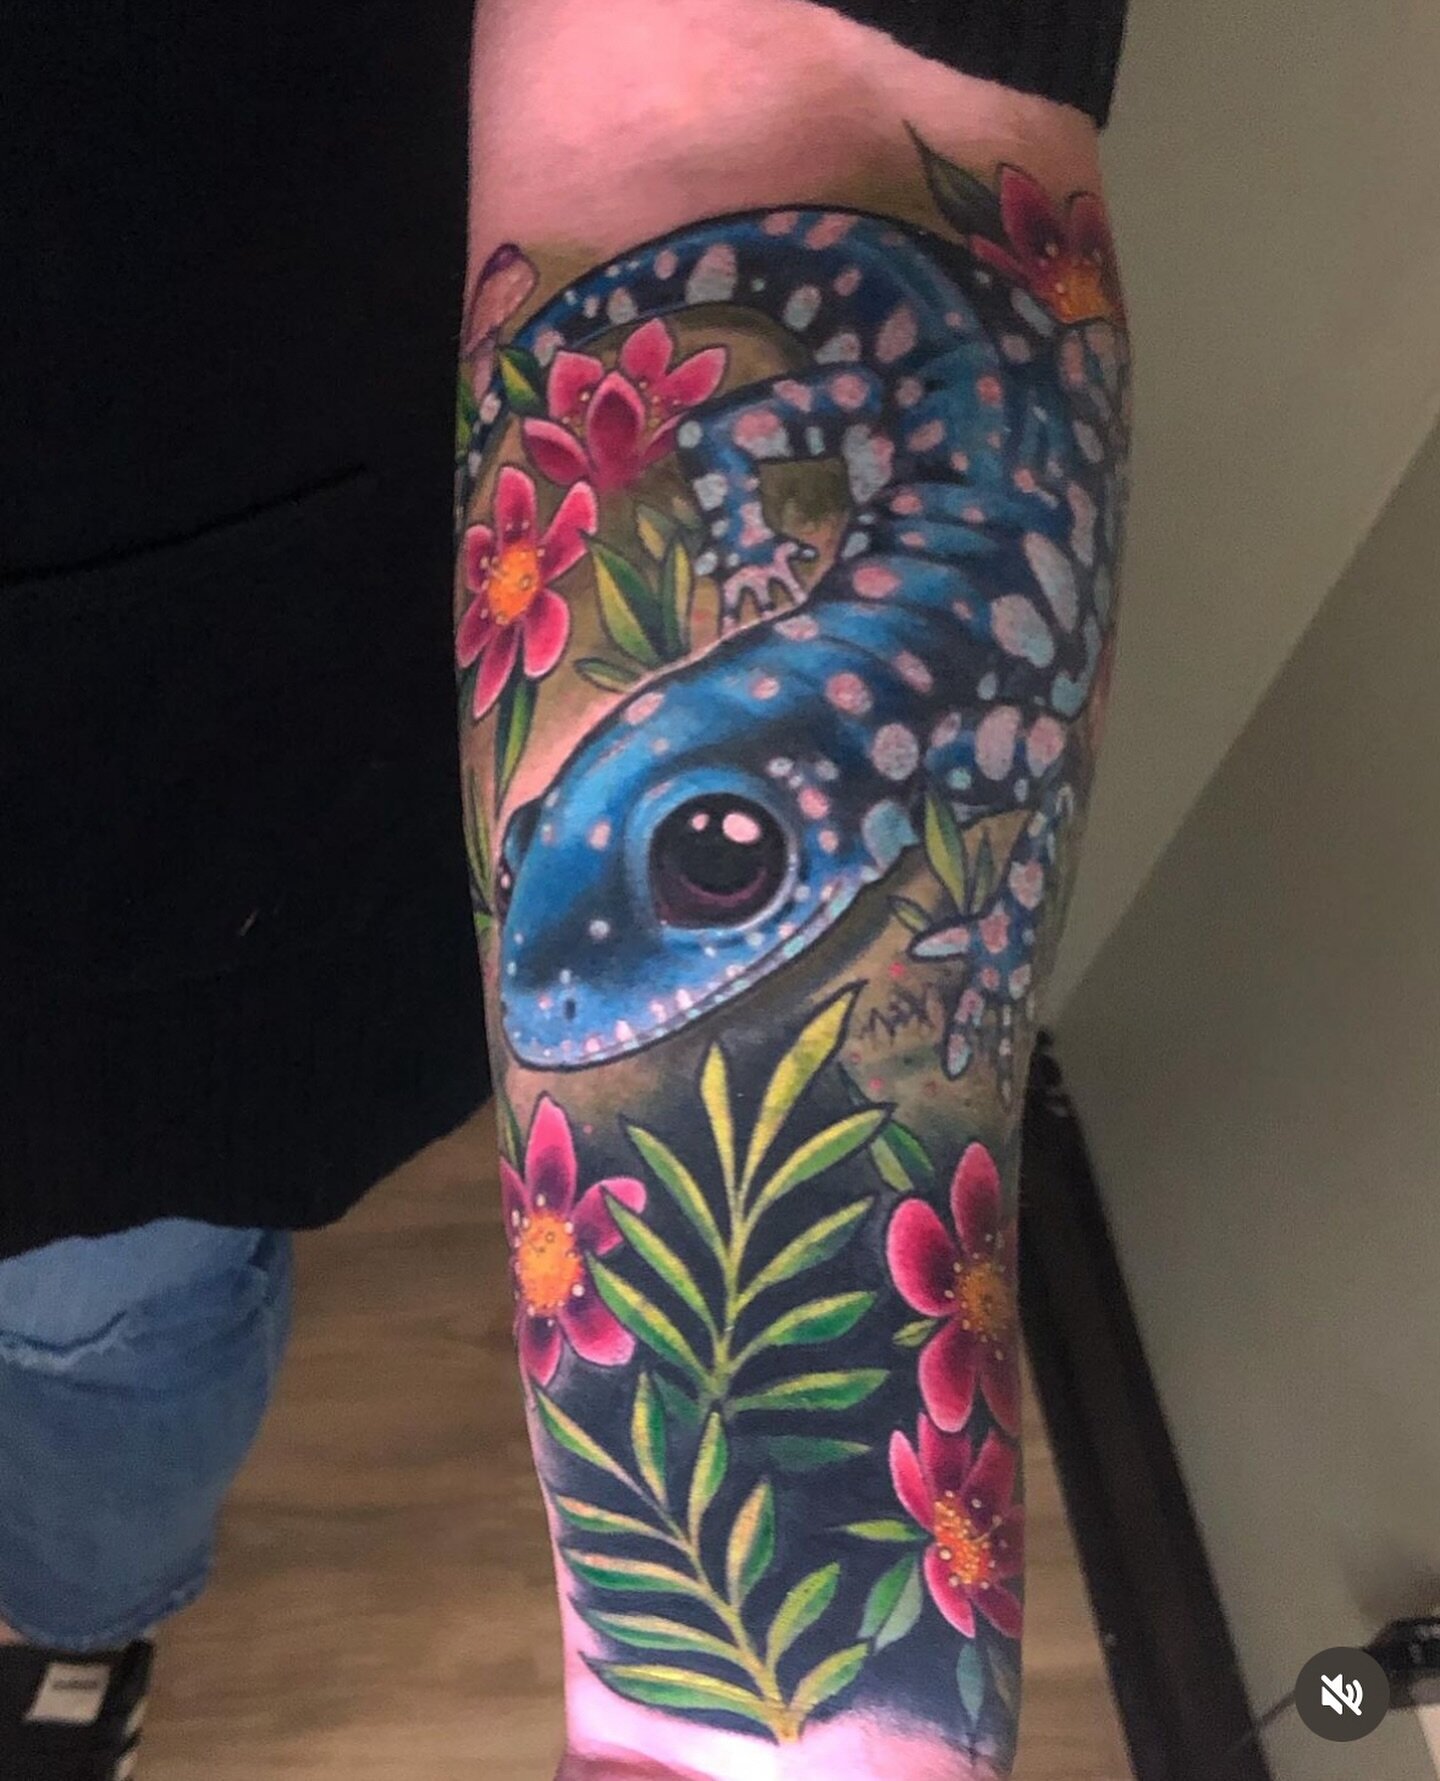 Blue spotted salamander done by @_poop_taker 

Book with Tim - pooptakertattoomaker@gmail.com